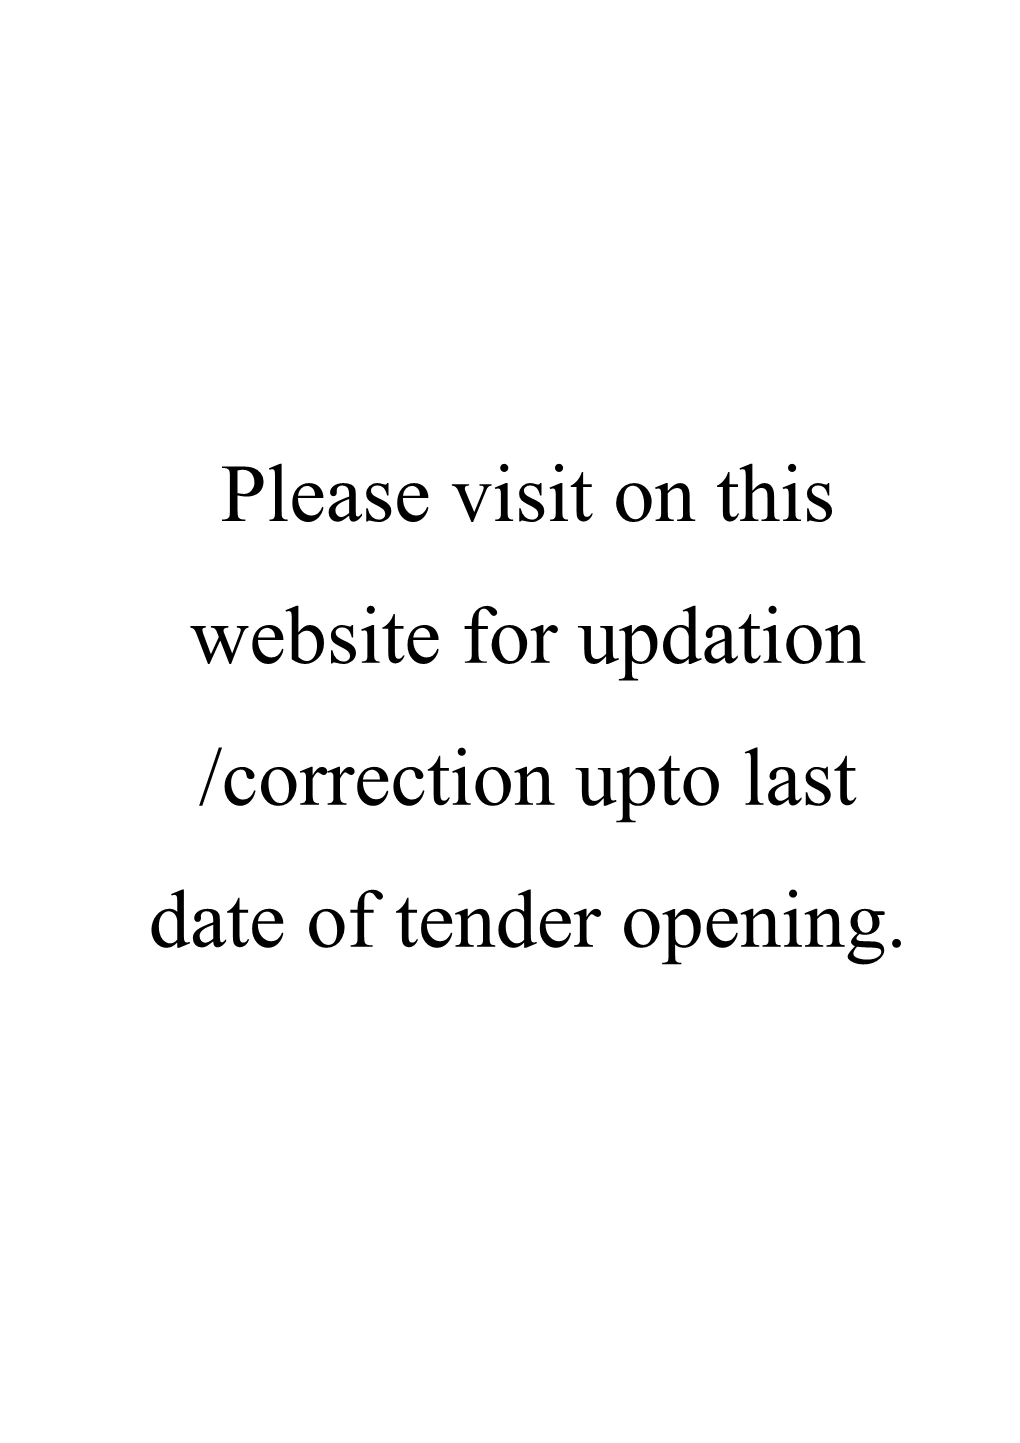 Please Visit on This Website for Updation /Correction Upto Last Date of Tender Opening